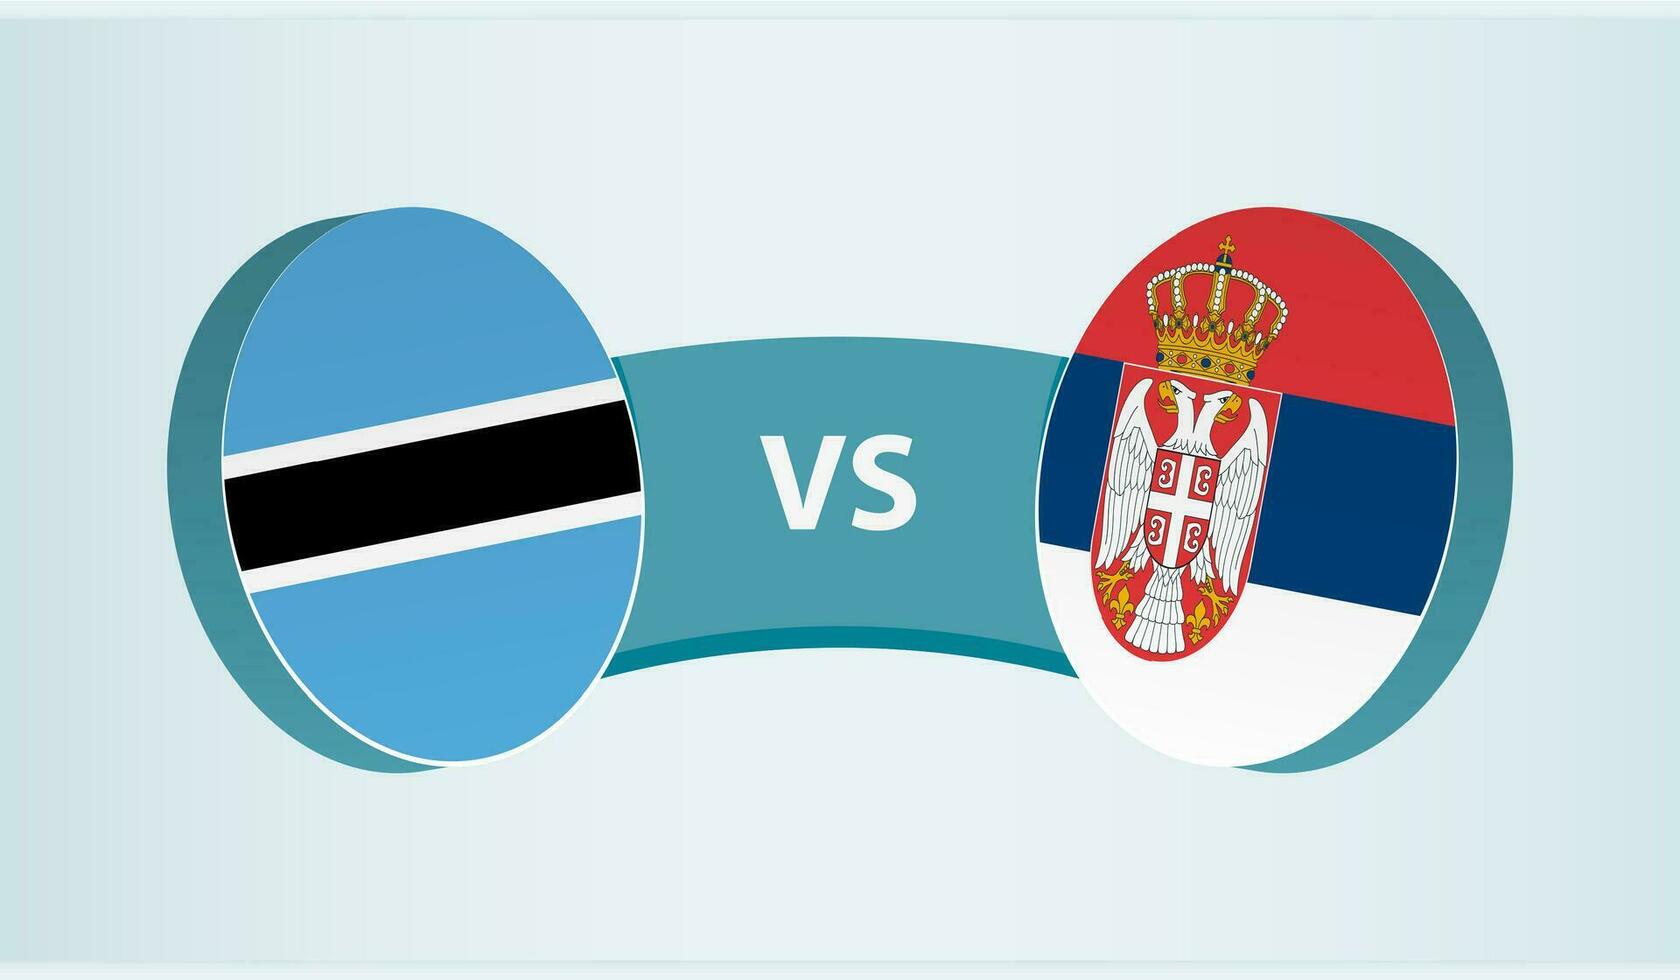 Botswana versus Serbia, team sports competition concept. vector